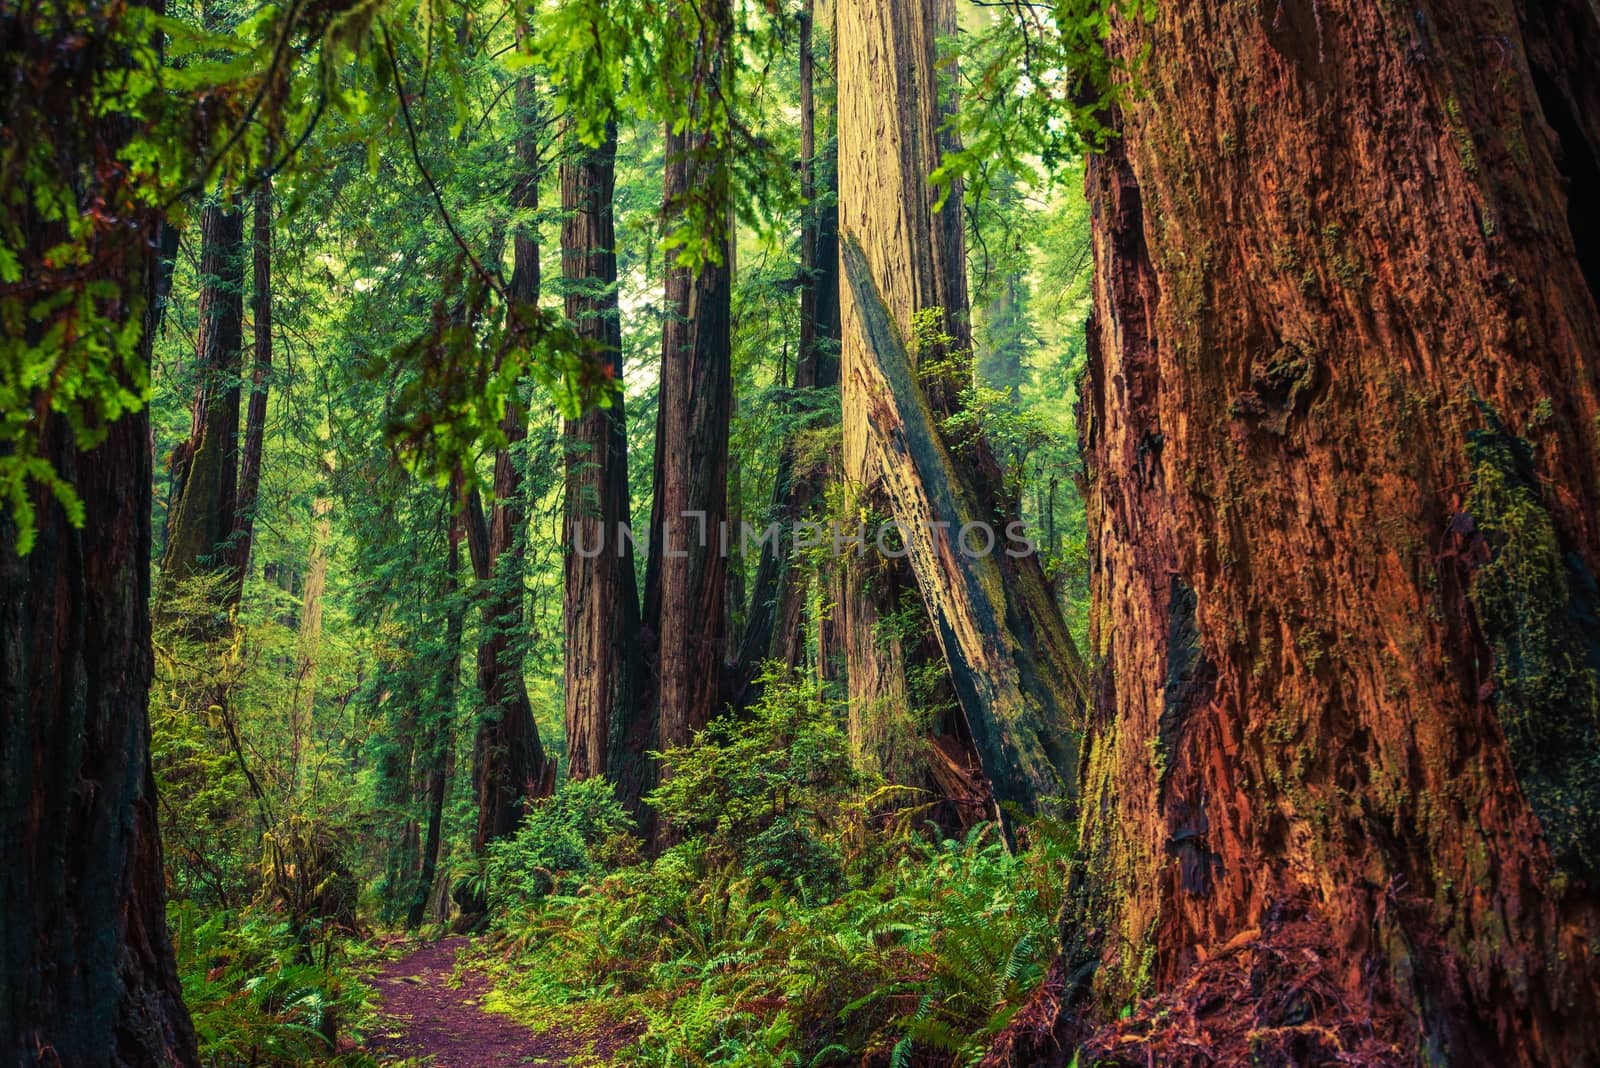 California Redwood Trail by welcomia